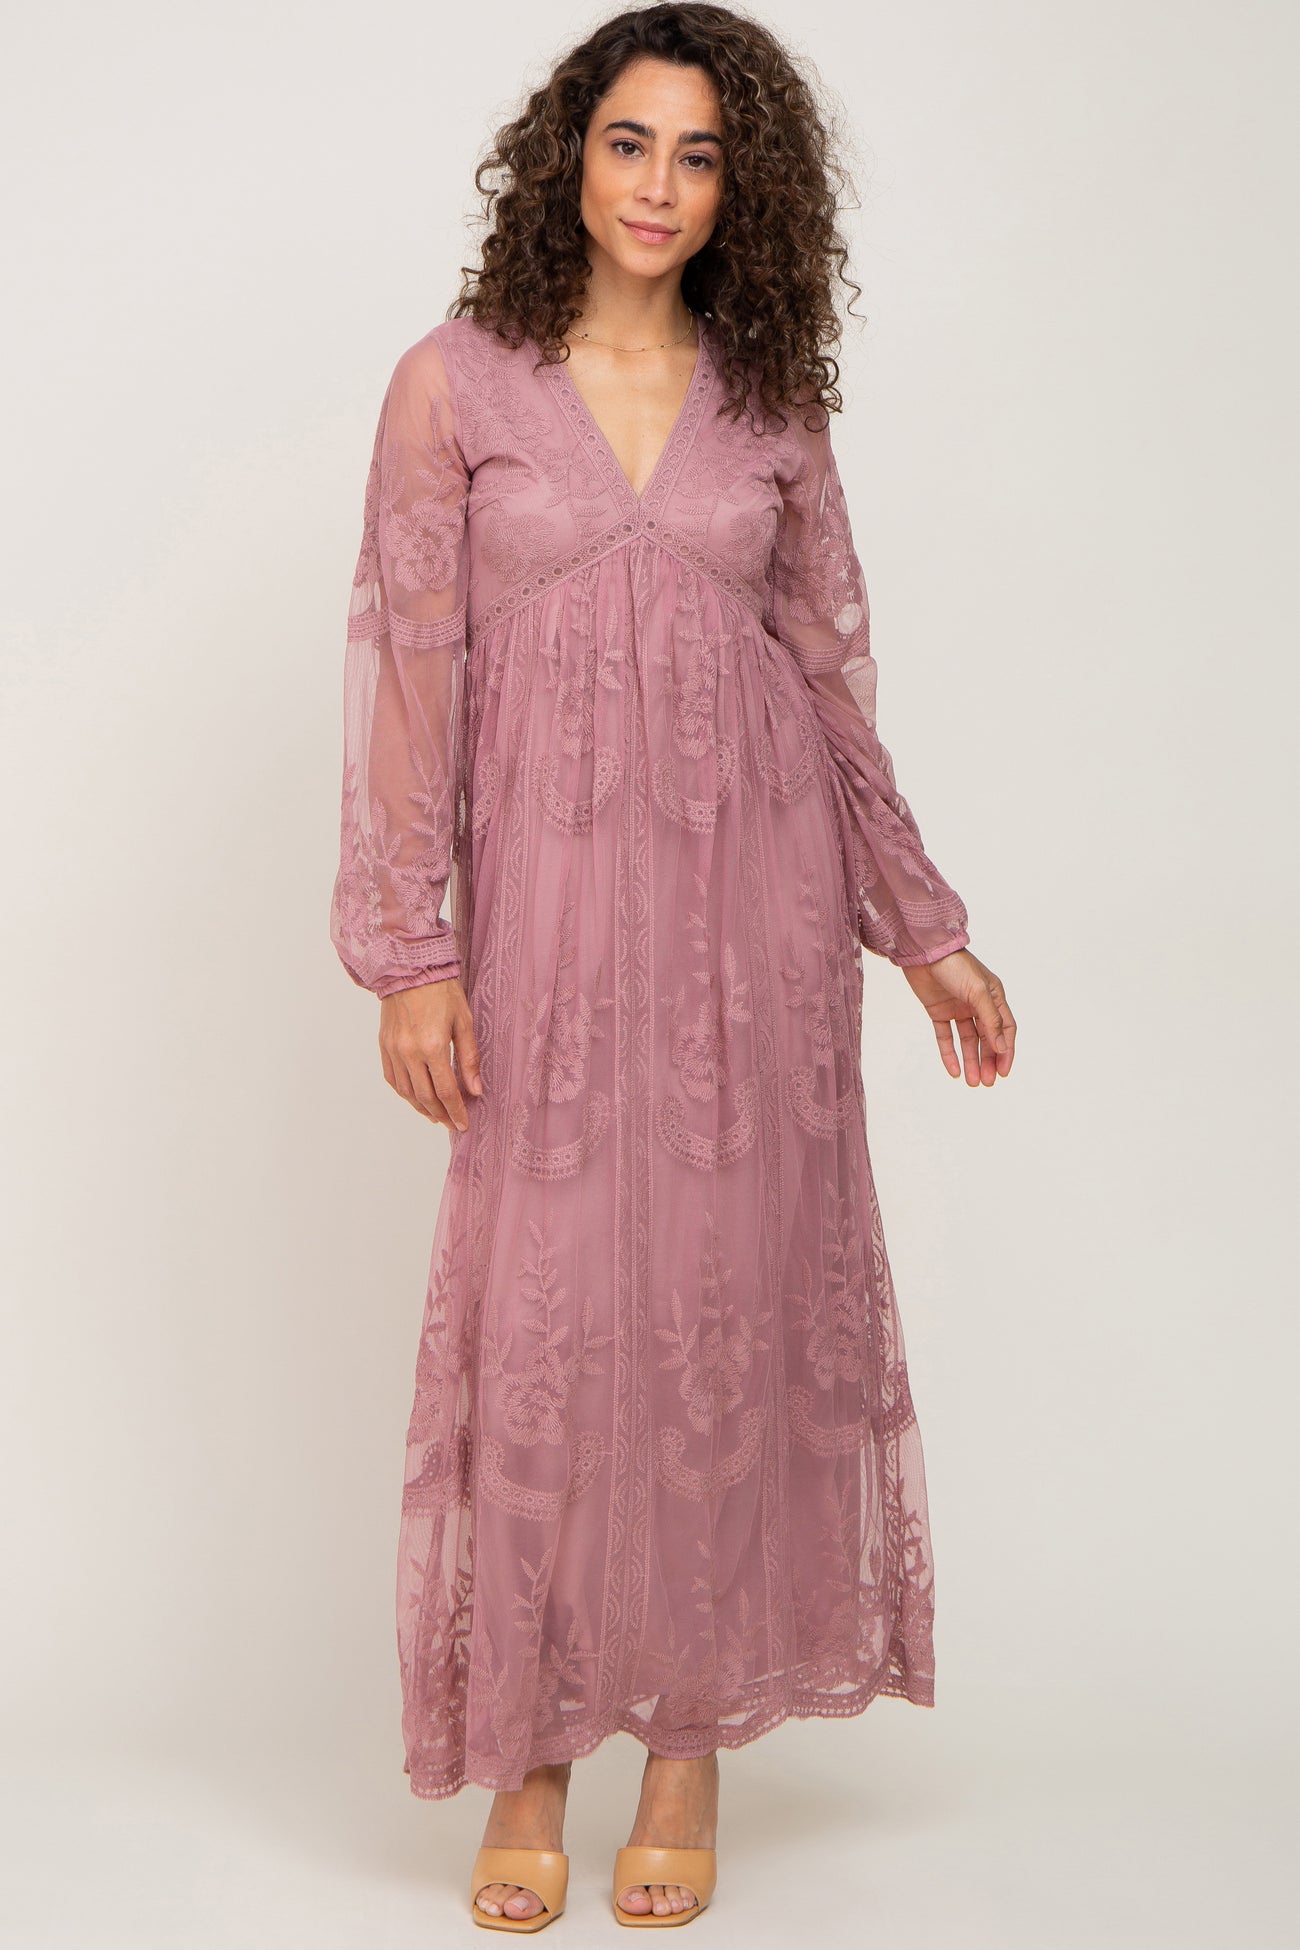 Pinkblush, Dresses, Bnwt Muave Embroidered Dress With Pockets